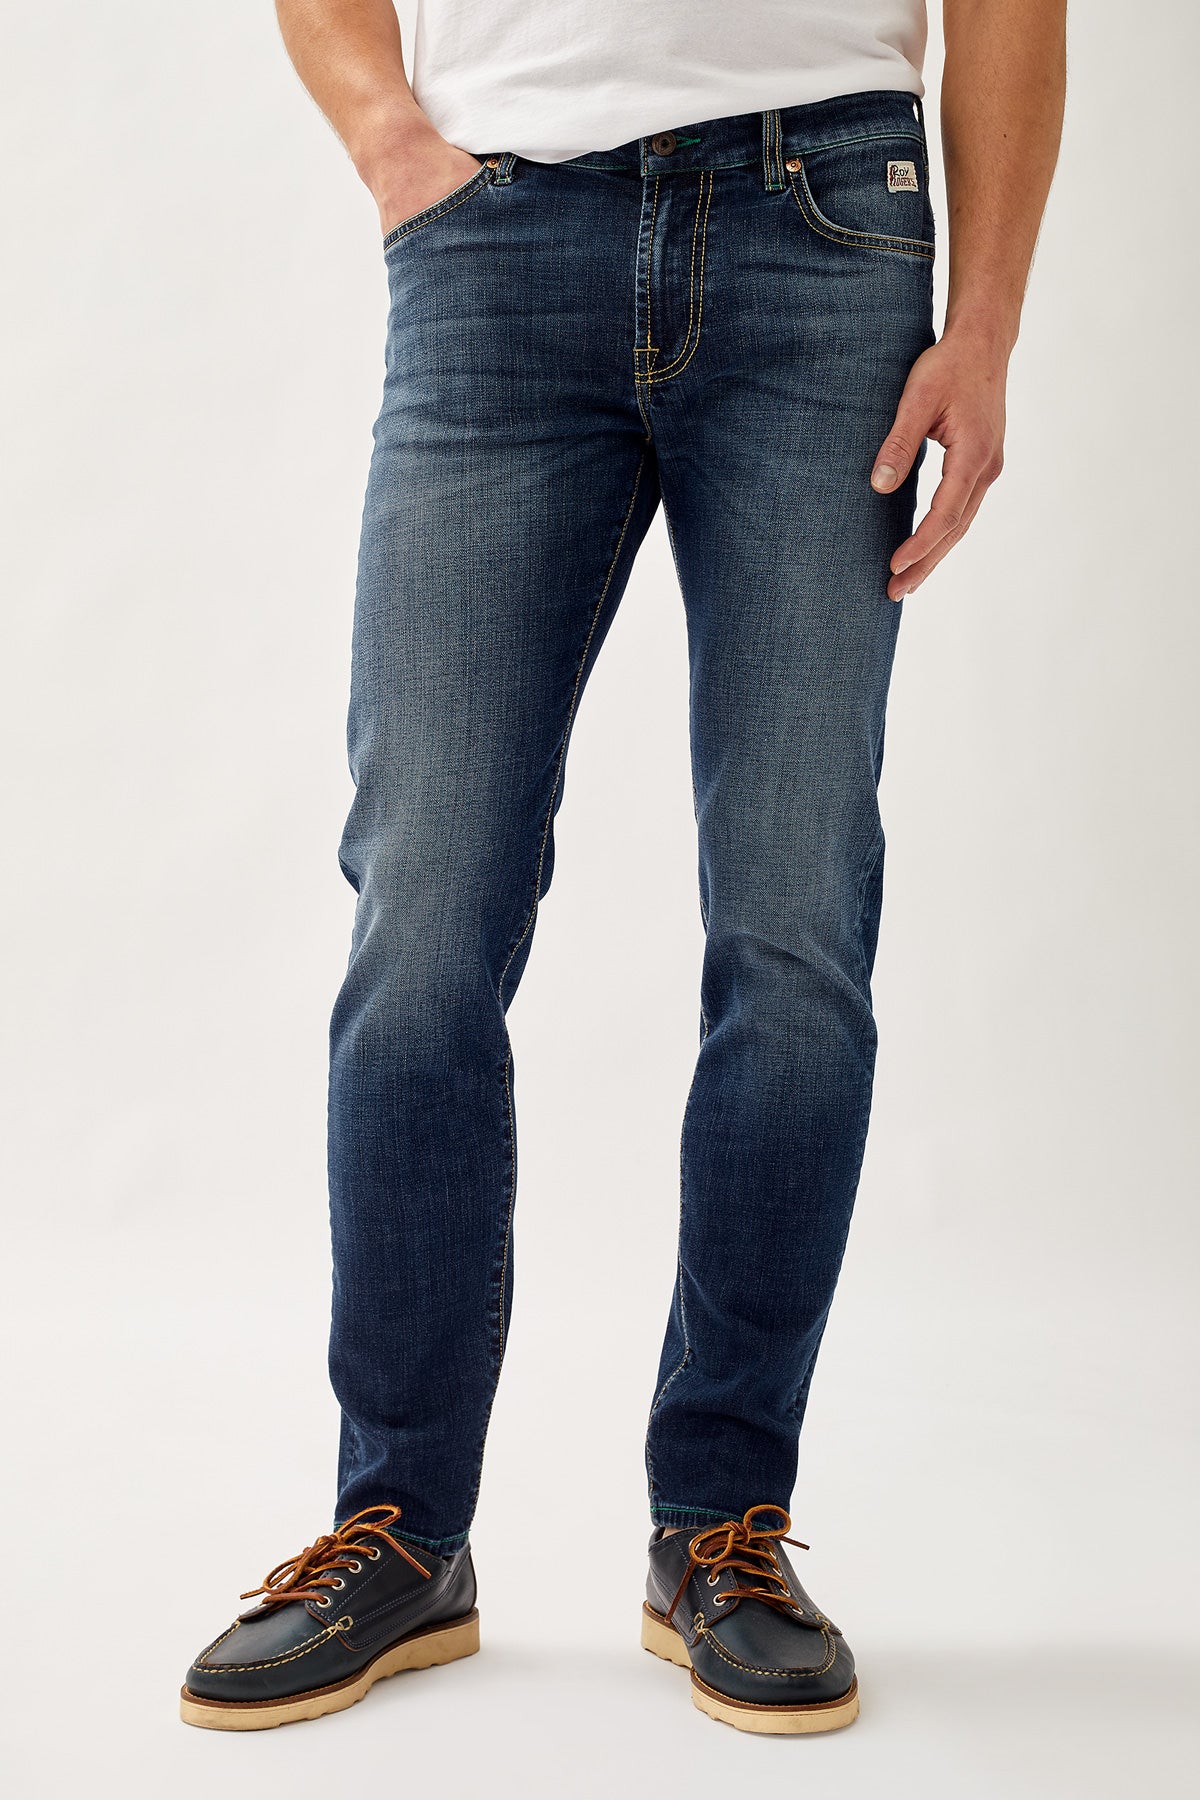 Jeans 517 Carlin Special / Jeans - Ideal Moda